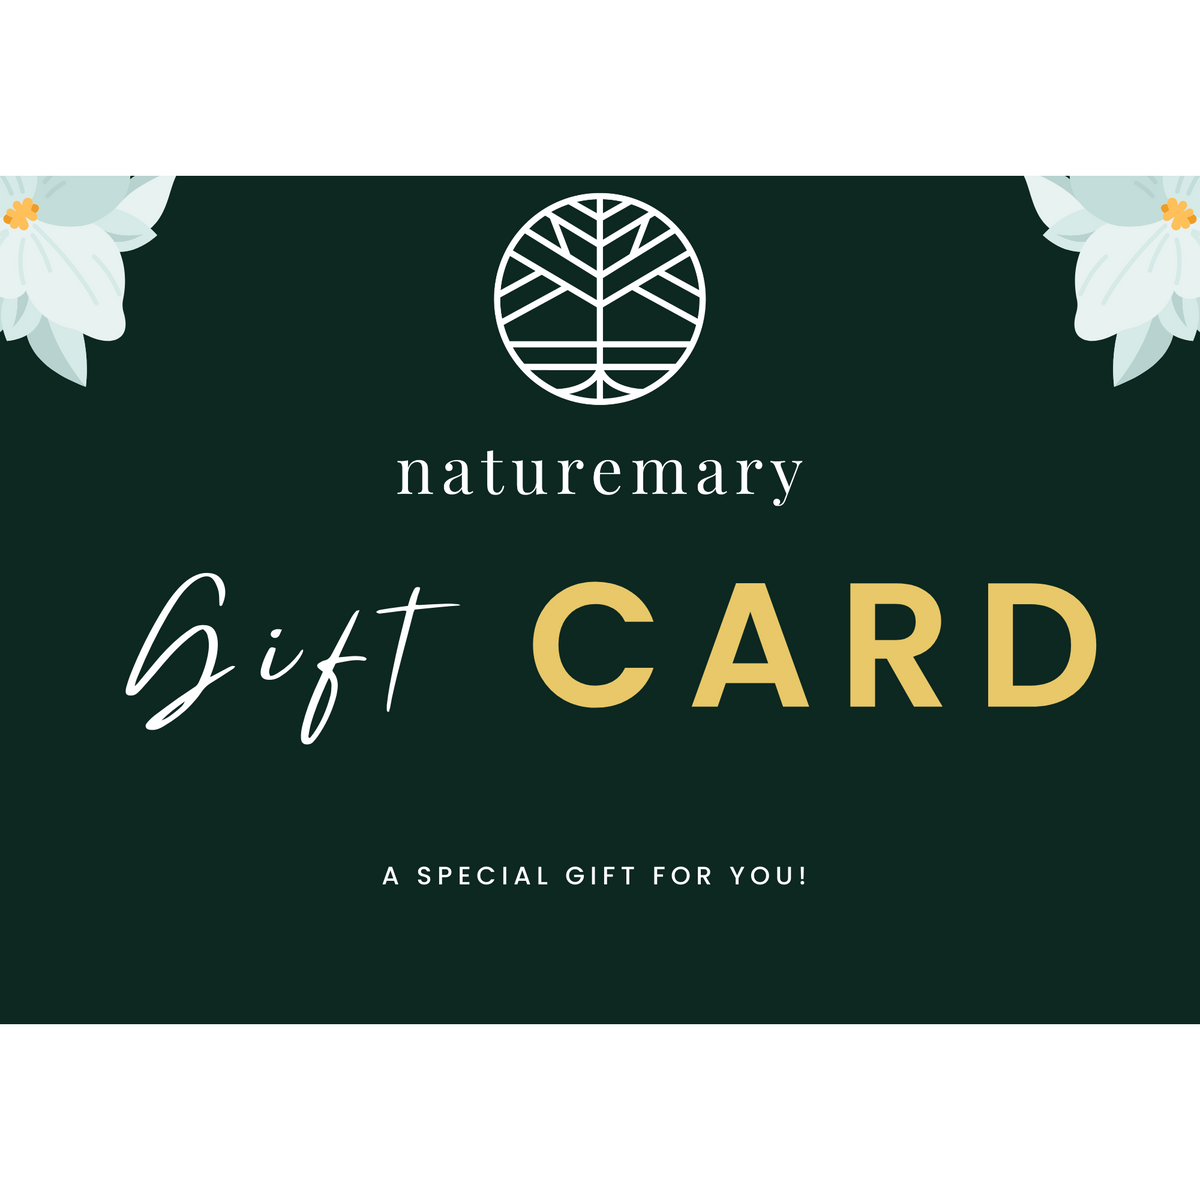 naturemary gift card - Give the gift of self-care - naturemary